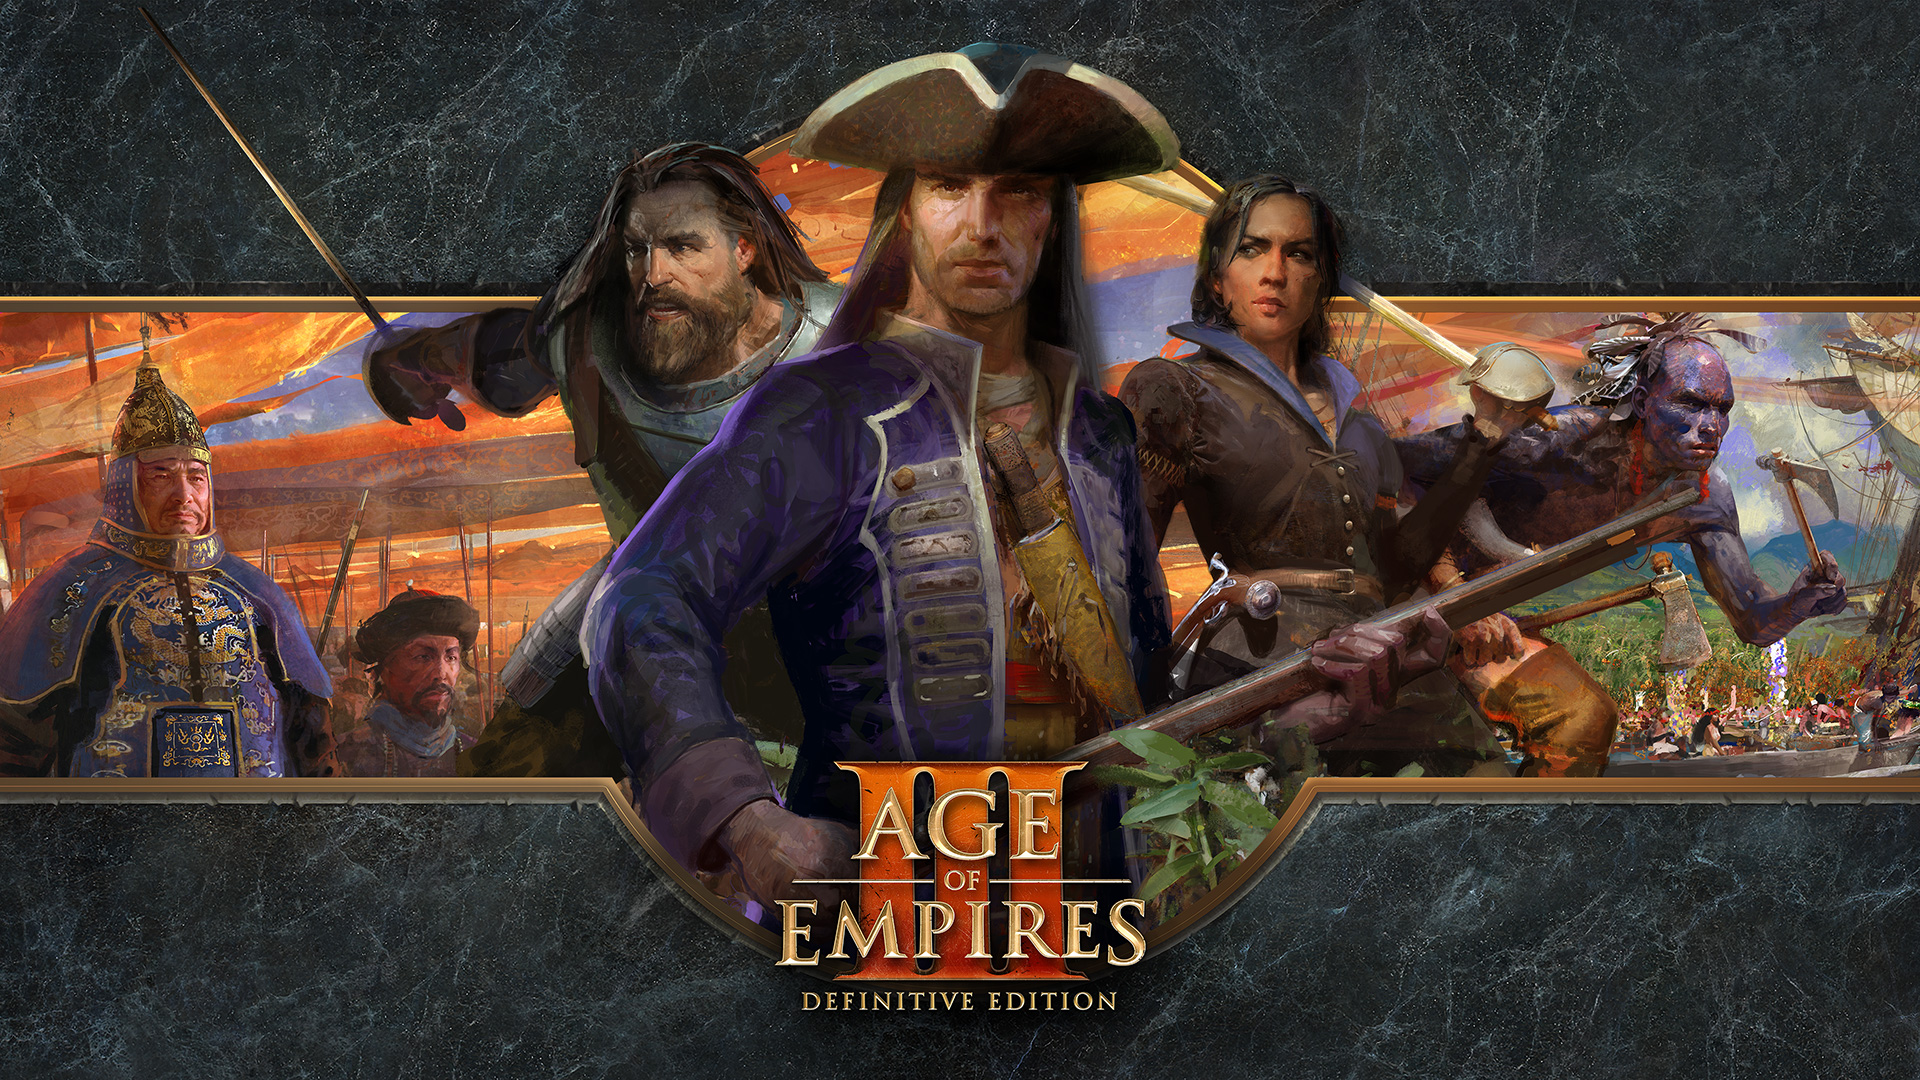 Age of empires for steam фото 113